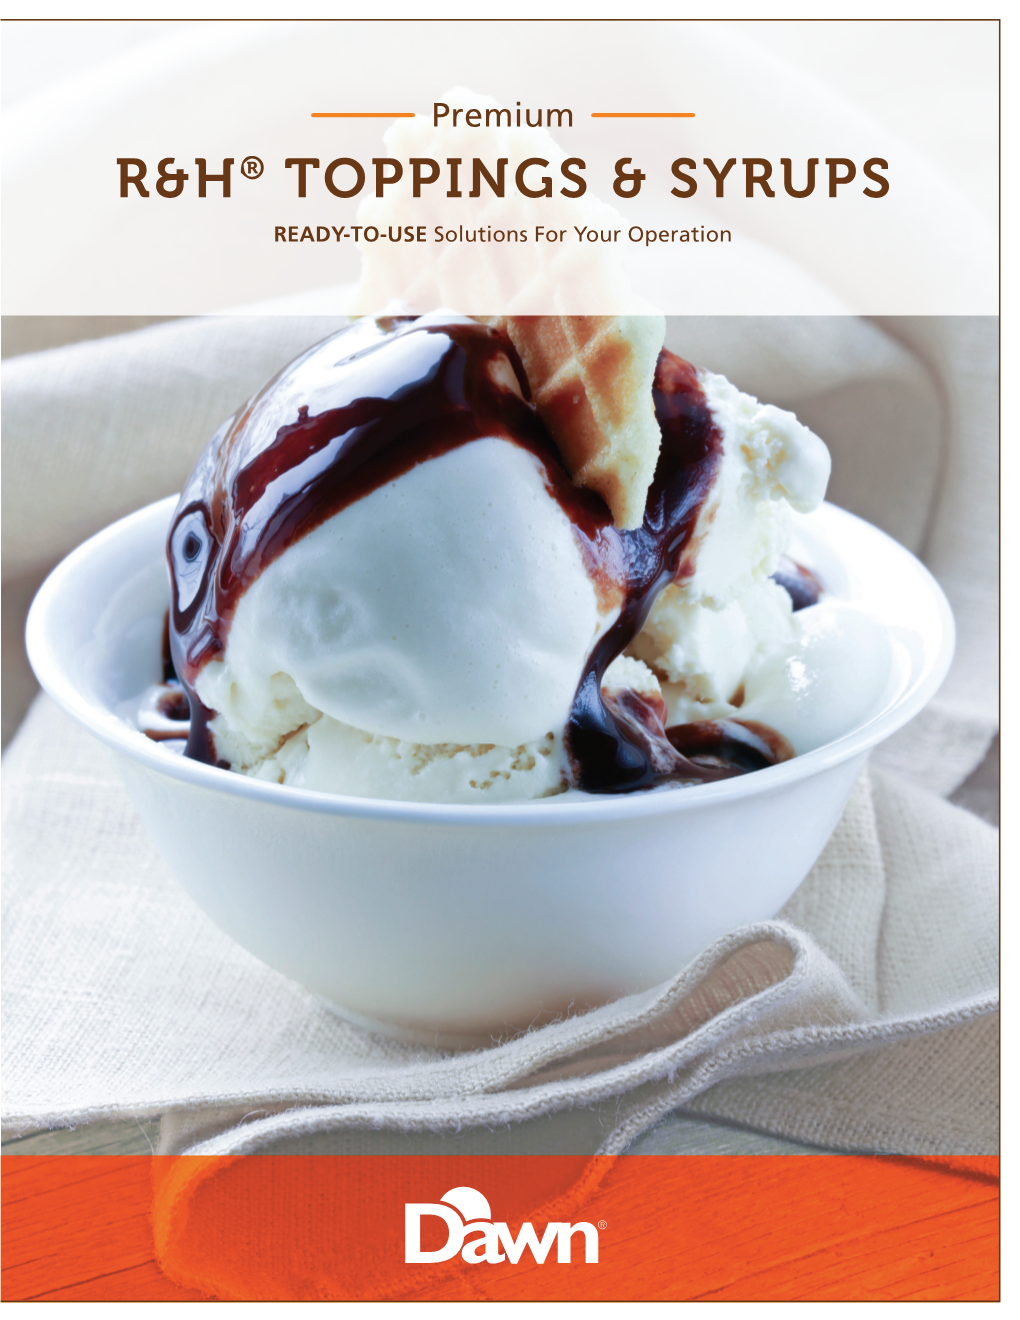 R&H® Toppings & Syrups